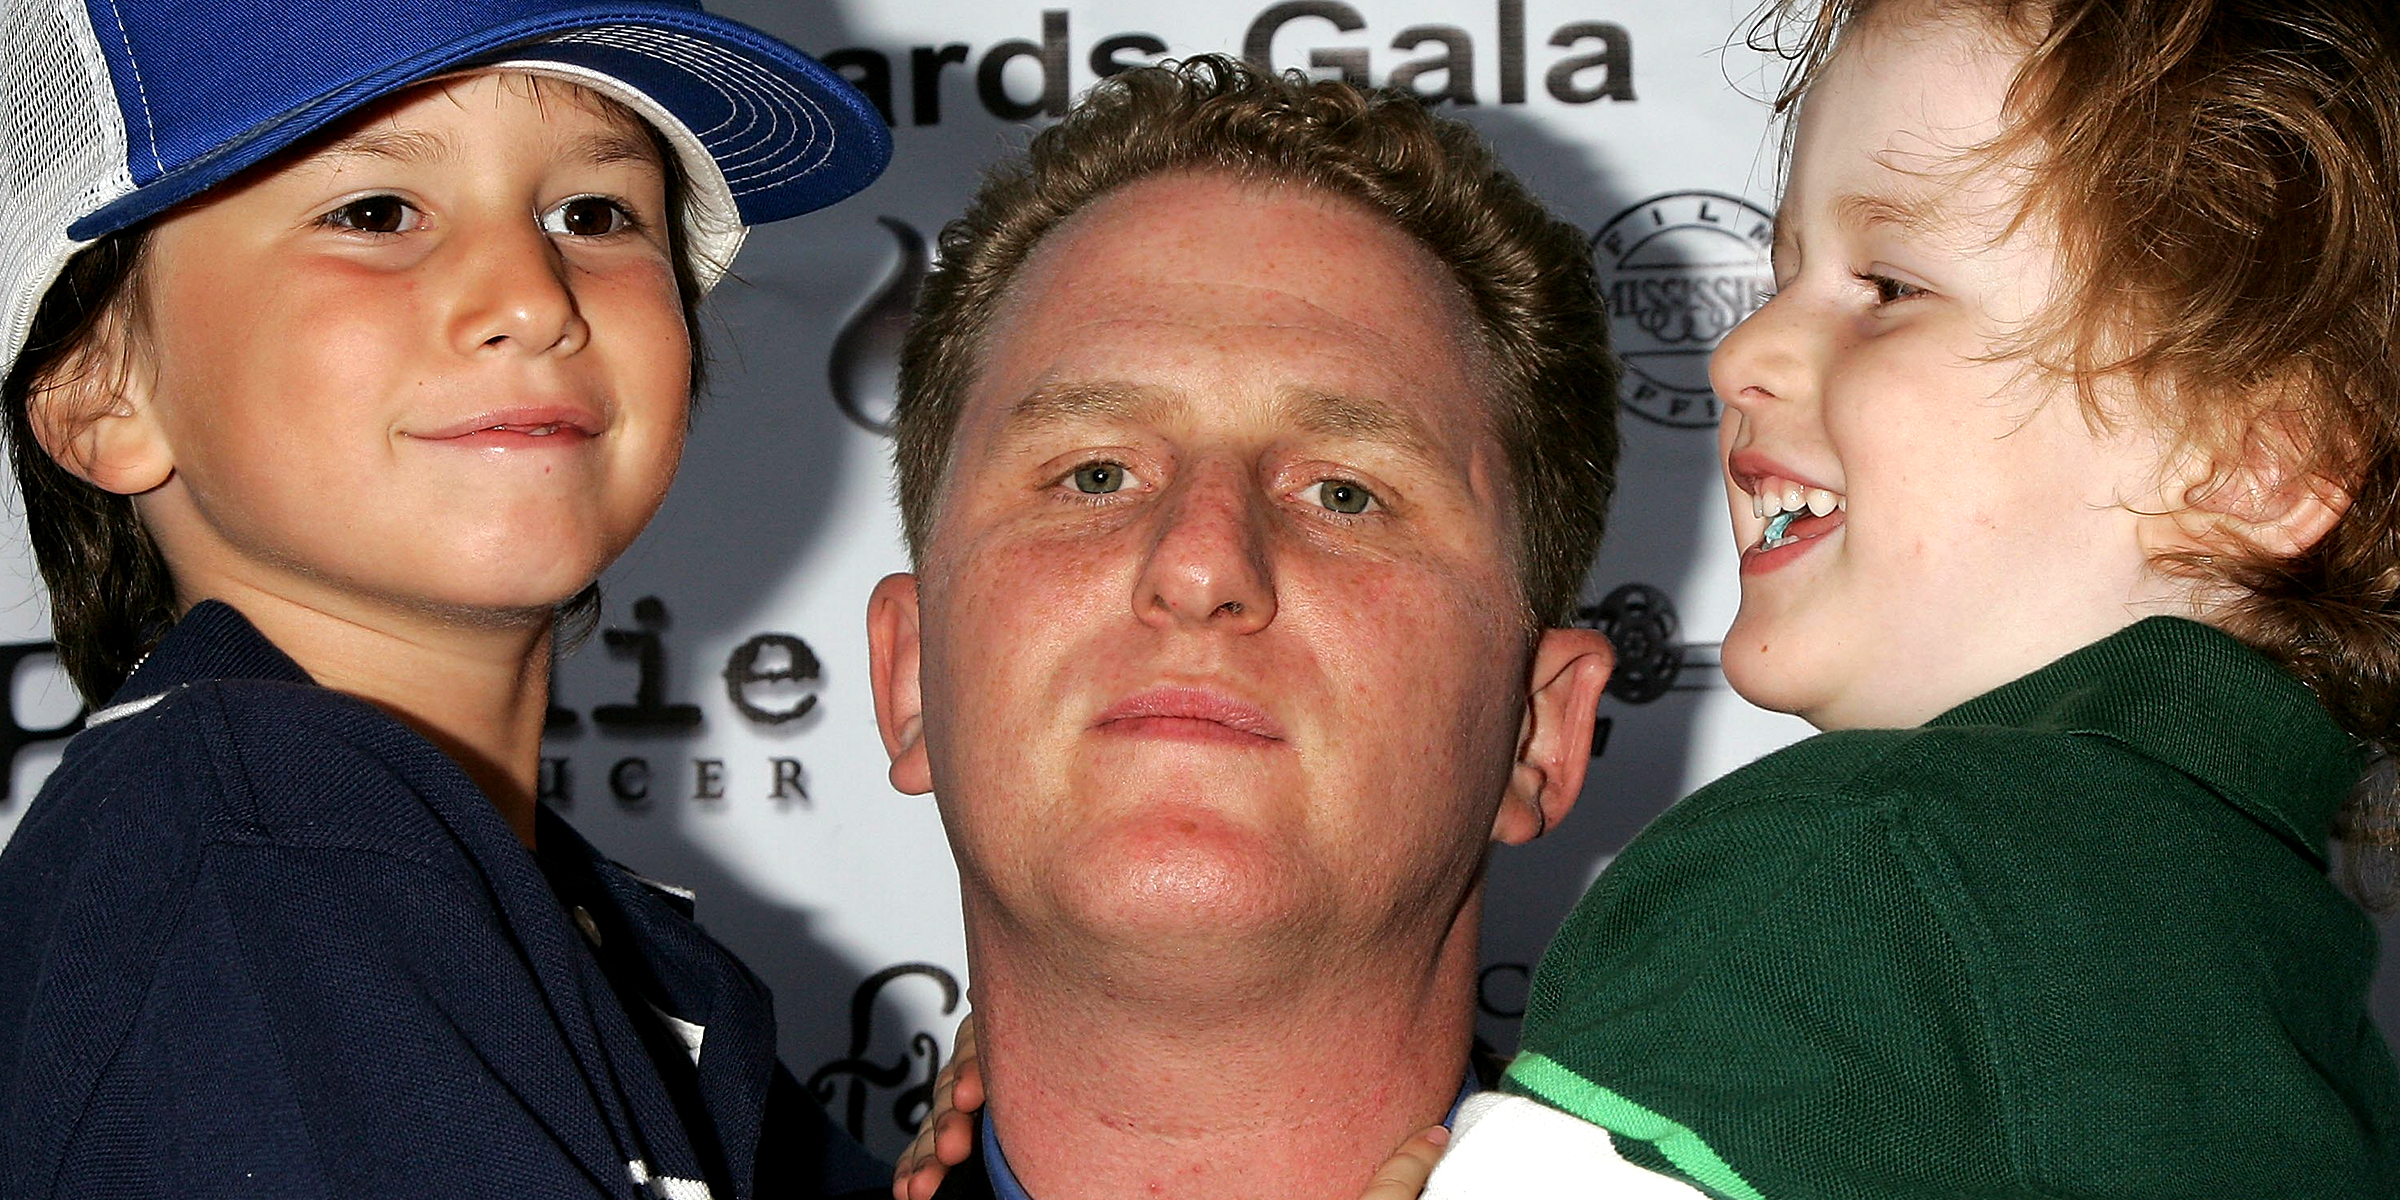 Michael Rapaport with his sons Julian Ali and Maceo Rapaport | Source: Getty Images